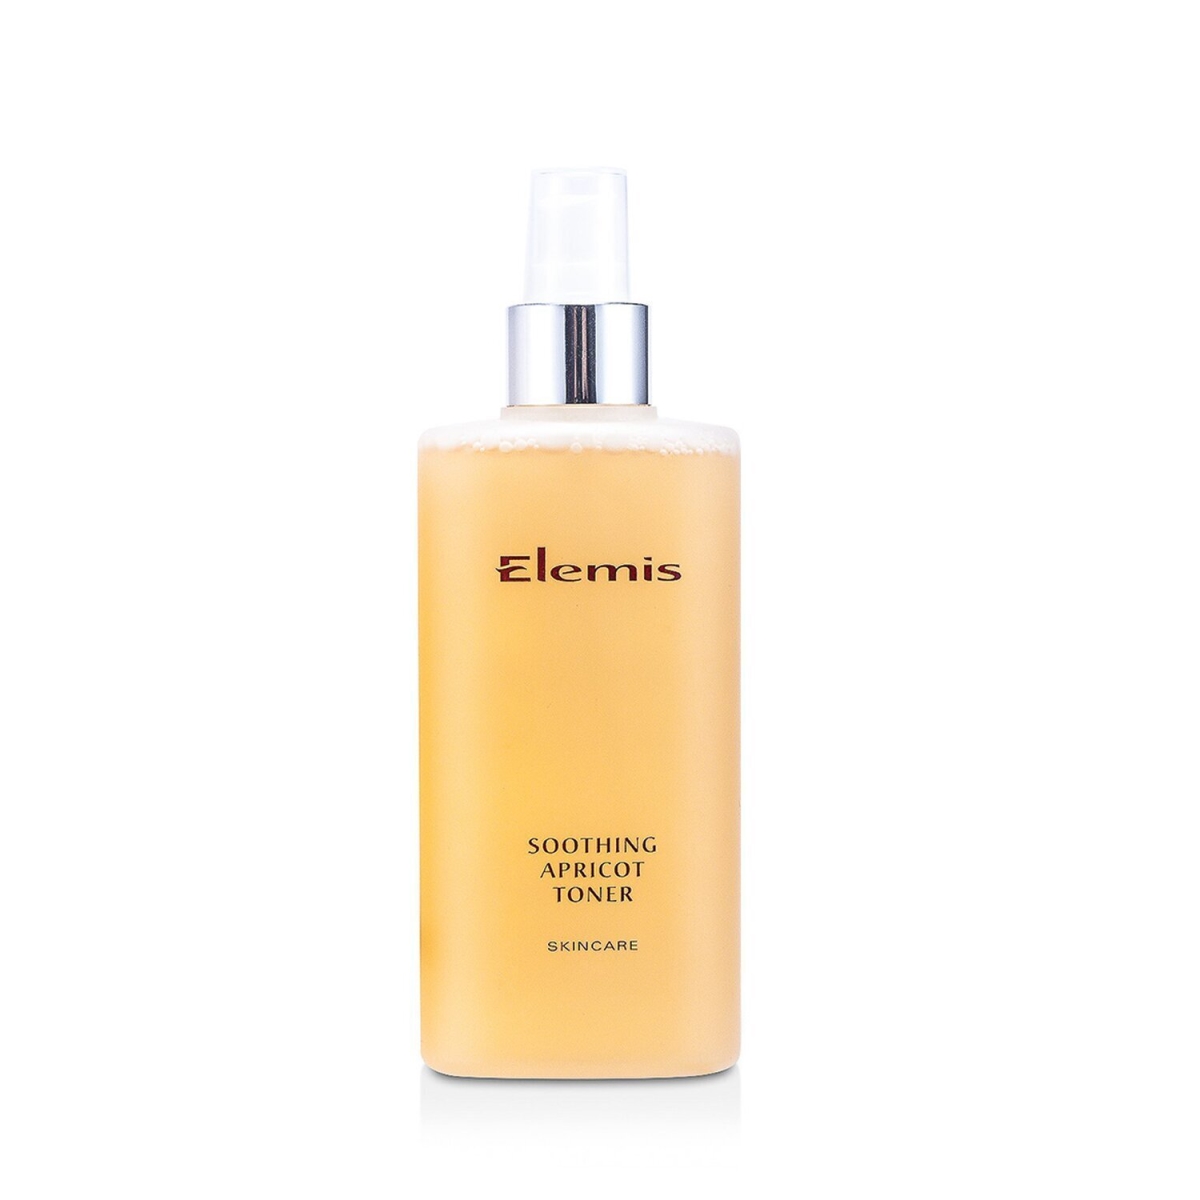 Picture of Elemis 77331 6.8 oz Soothing Apricot Toner